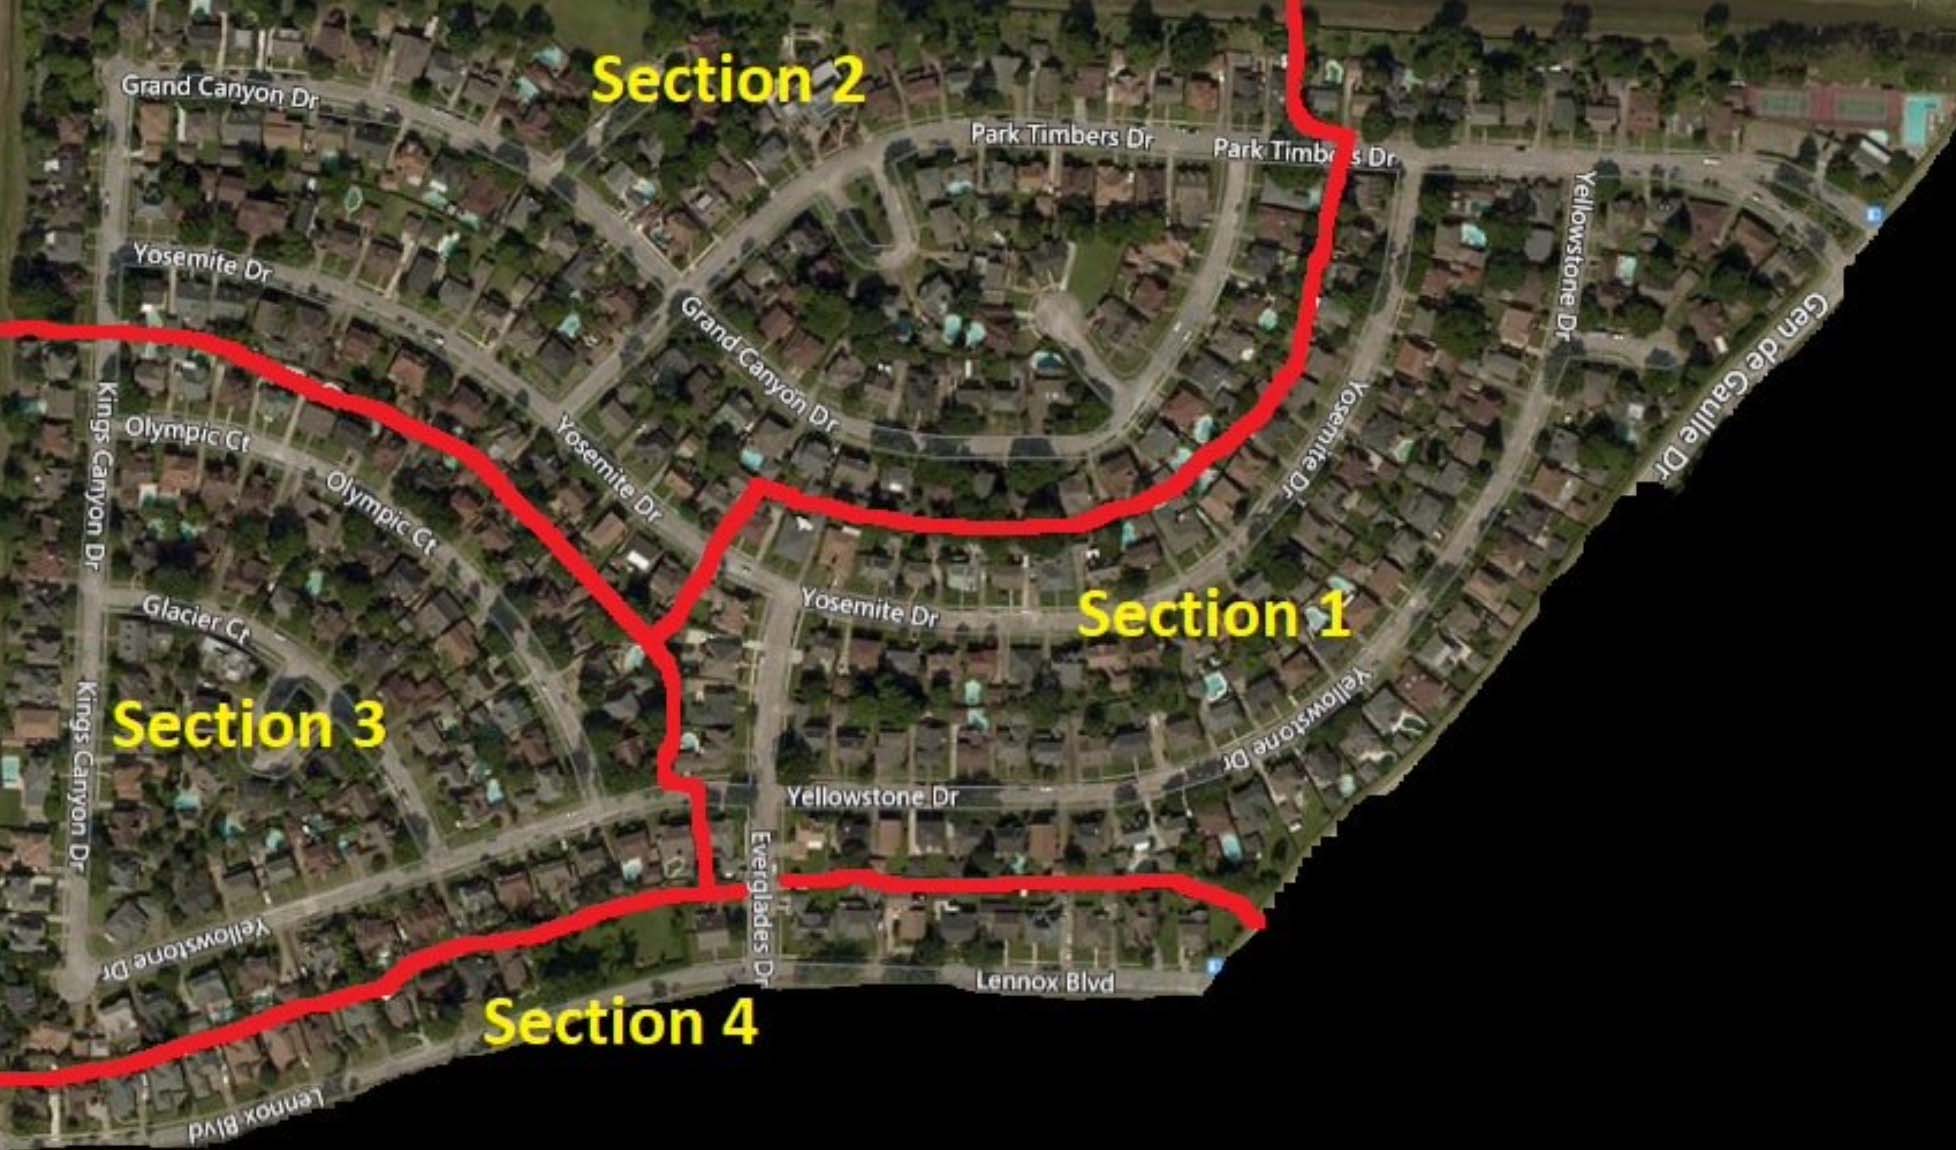 Section Maps